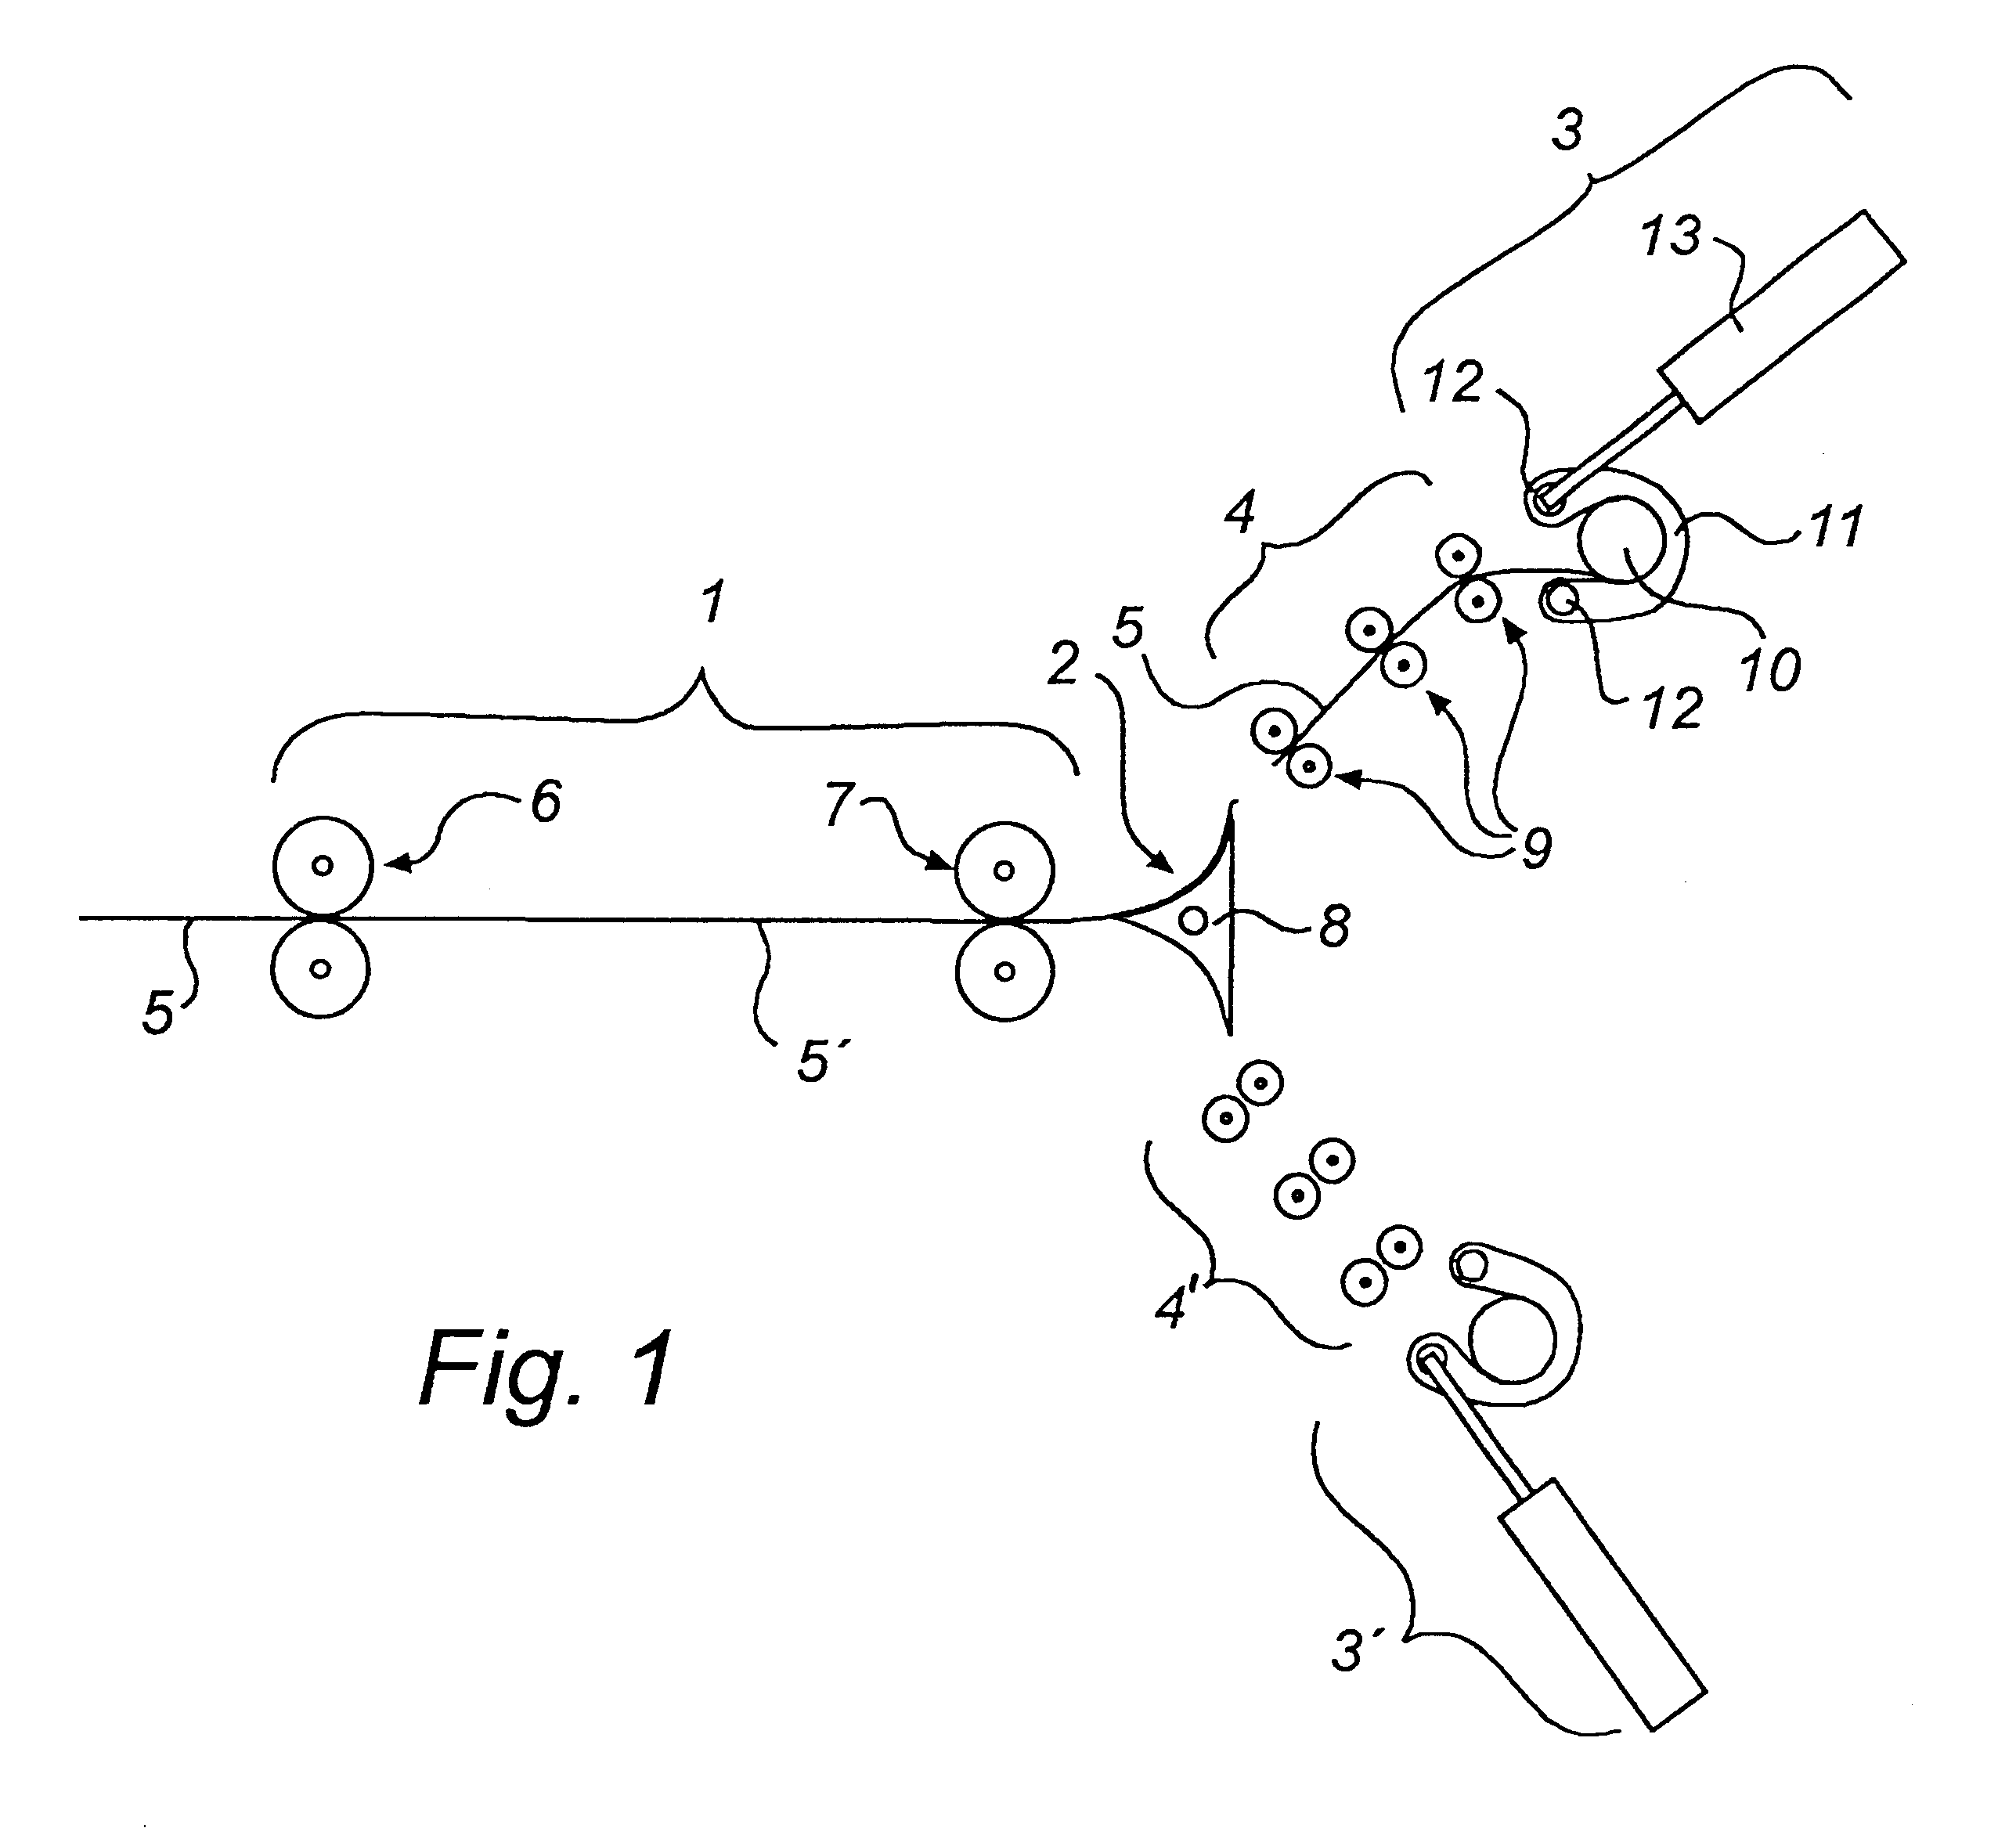 Apparatus and method of producing rolls of bags